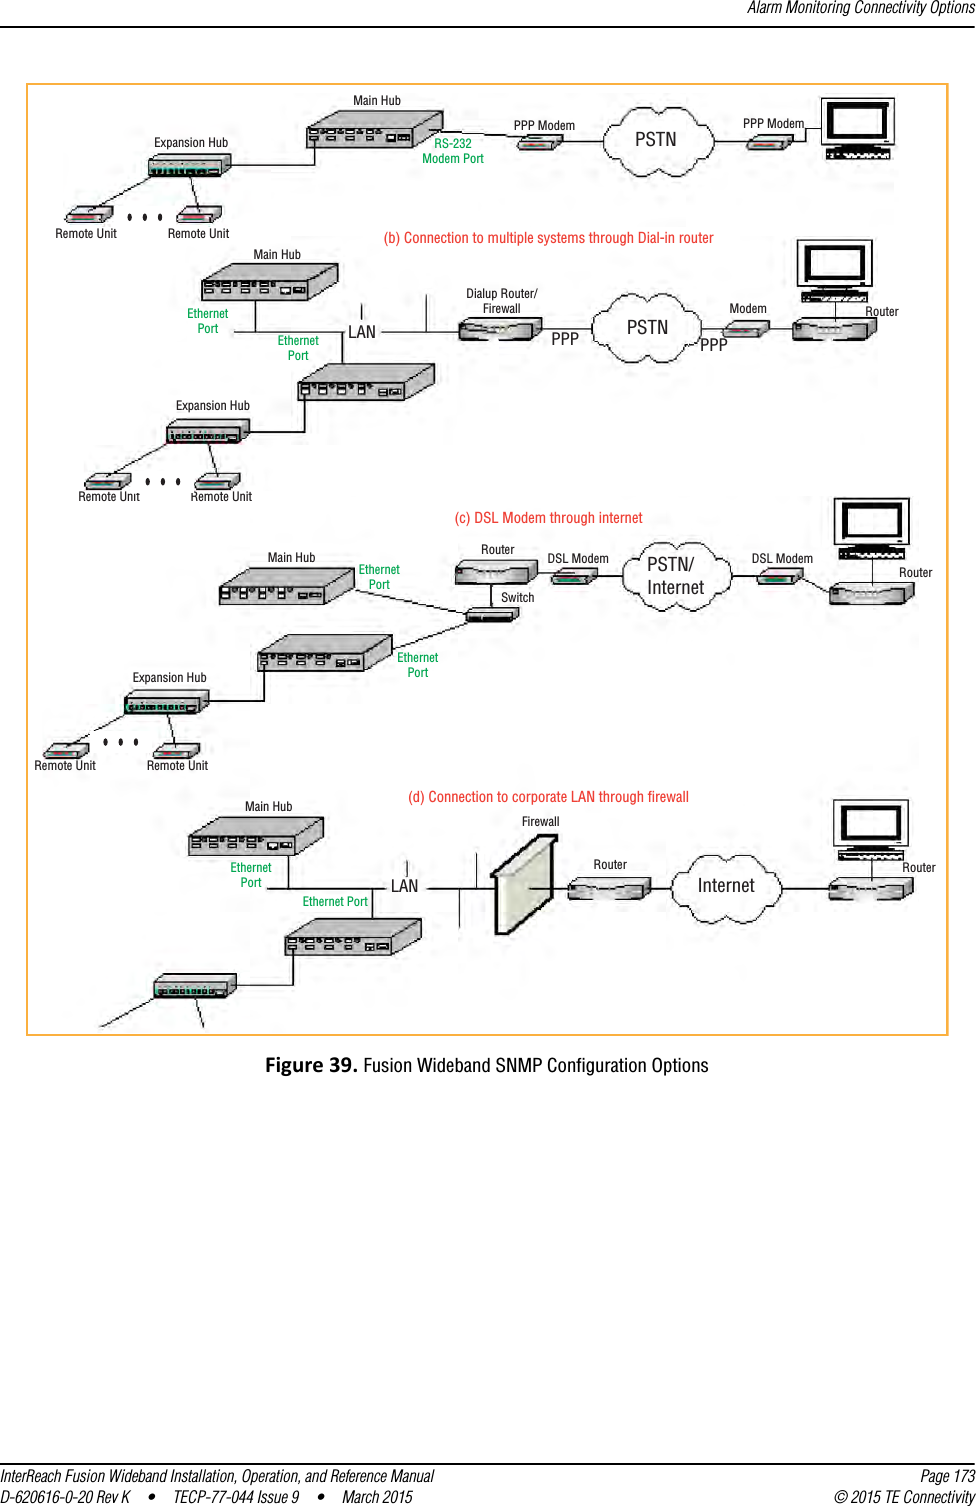 Alarm Monitoring Connectivity OptionsInterReach Fusion Wideband Installation, Operation, and Reference Manual Page 173D-620616-0-20 Rev K  •  TECP-77-044 Issue 9  •  March 2015 © 2015 TE ConnectivityFigure 39. Fusion Wideband SNMP Configuration OptionsRemote Unit Remote UnitExpansion HubExpansion HubMain HubRS-232Modem PortPPP Modem PSTNPPP ModemRemote Unit Remote UnitExpansion HubMain HubPSTN(b) Connection to multiple systems through Dial-in routerRemote Unit Remote Unit(c) DSL Modem through internet(d) Connection to corporate LAN through firewallLANEthernetPort EthernetPortDialup Router/Firewall ModemPPP PPPRouterMain Hub EthernetPortEthernetPortRouterSwitchDSL Modem DSL ModemRouterPSTN/InternetEthernetPortEthernet PortMain HubLANFirewallRouter RouterInternet